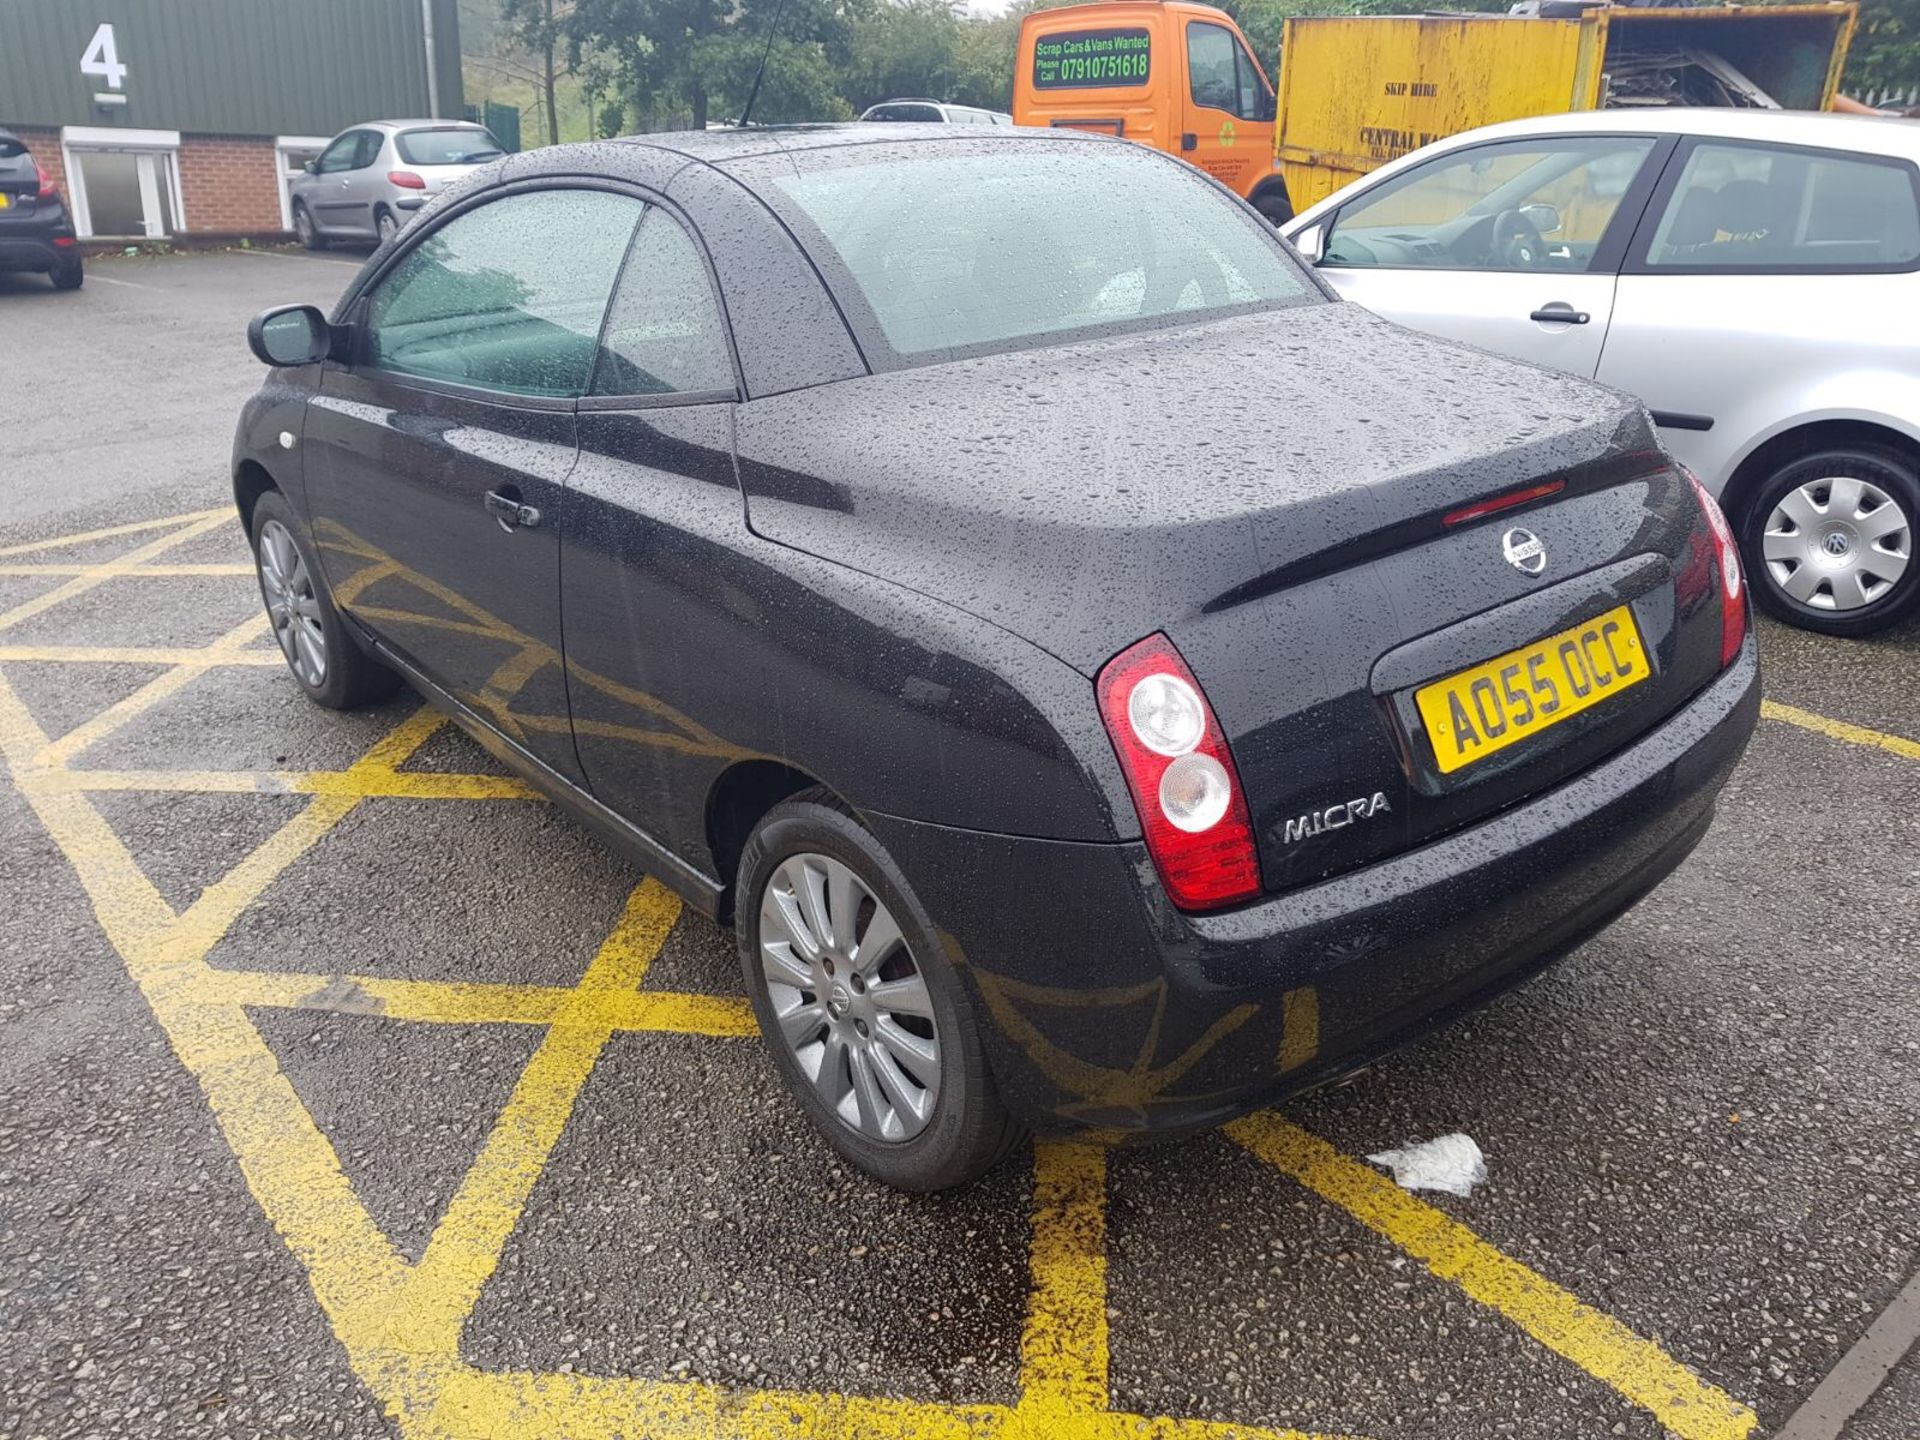 2005/55 REG NISSAN MICRA ESSENZA C+C CONVERTIBLE, SHOWING 3 FORMER KEEPERS *NO VAT* - Image 3 of 7